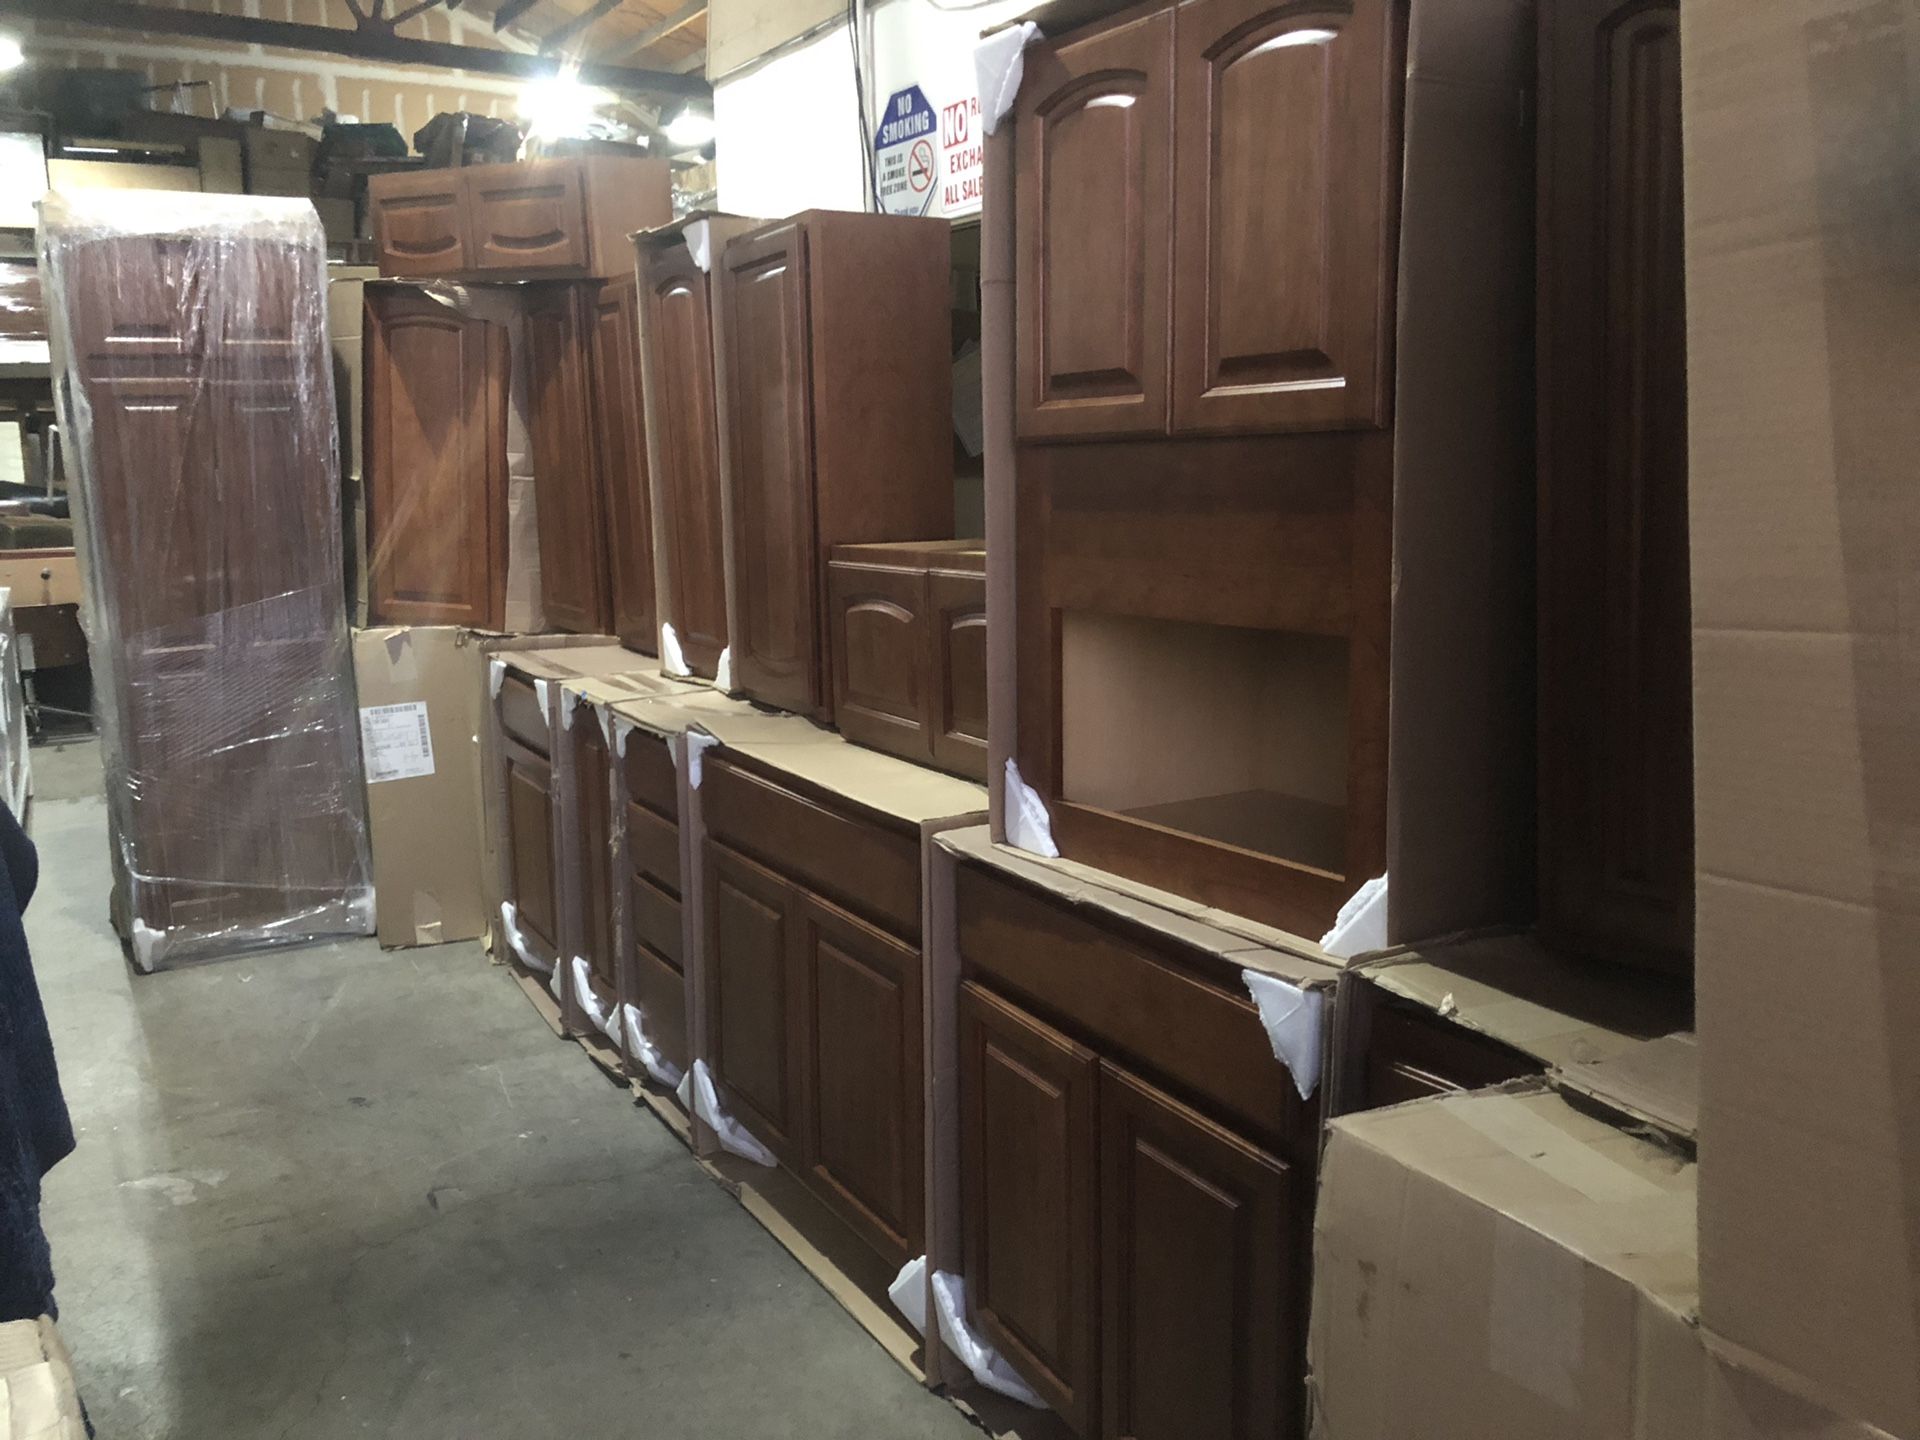 Beautiful new kitchen cabinets!!! Only 1,750$!!! Original price 5,000$!!!